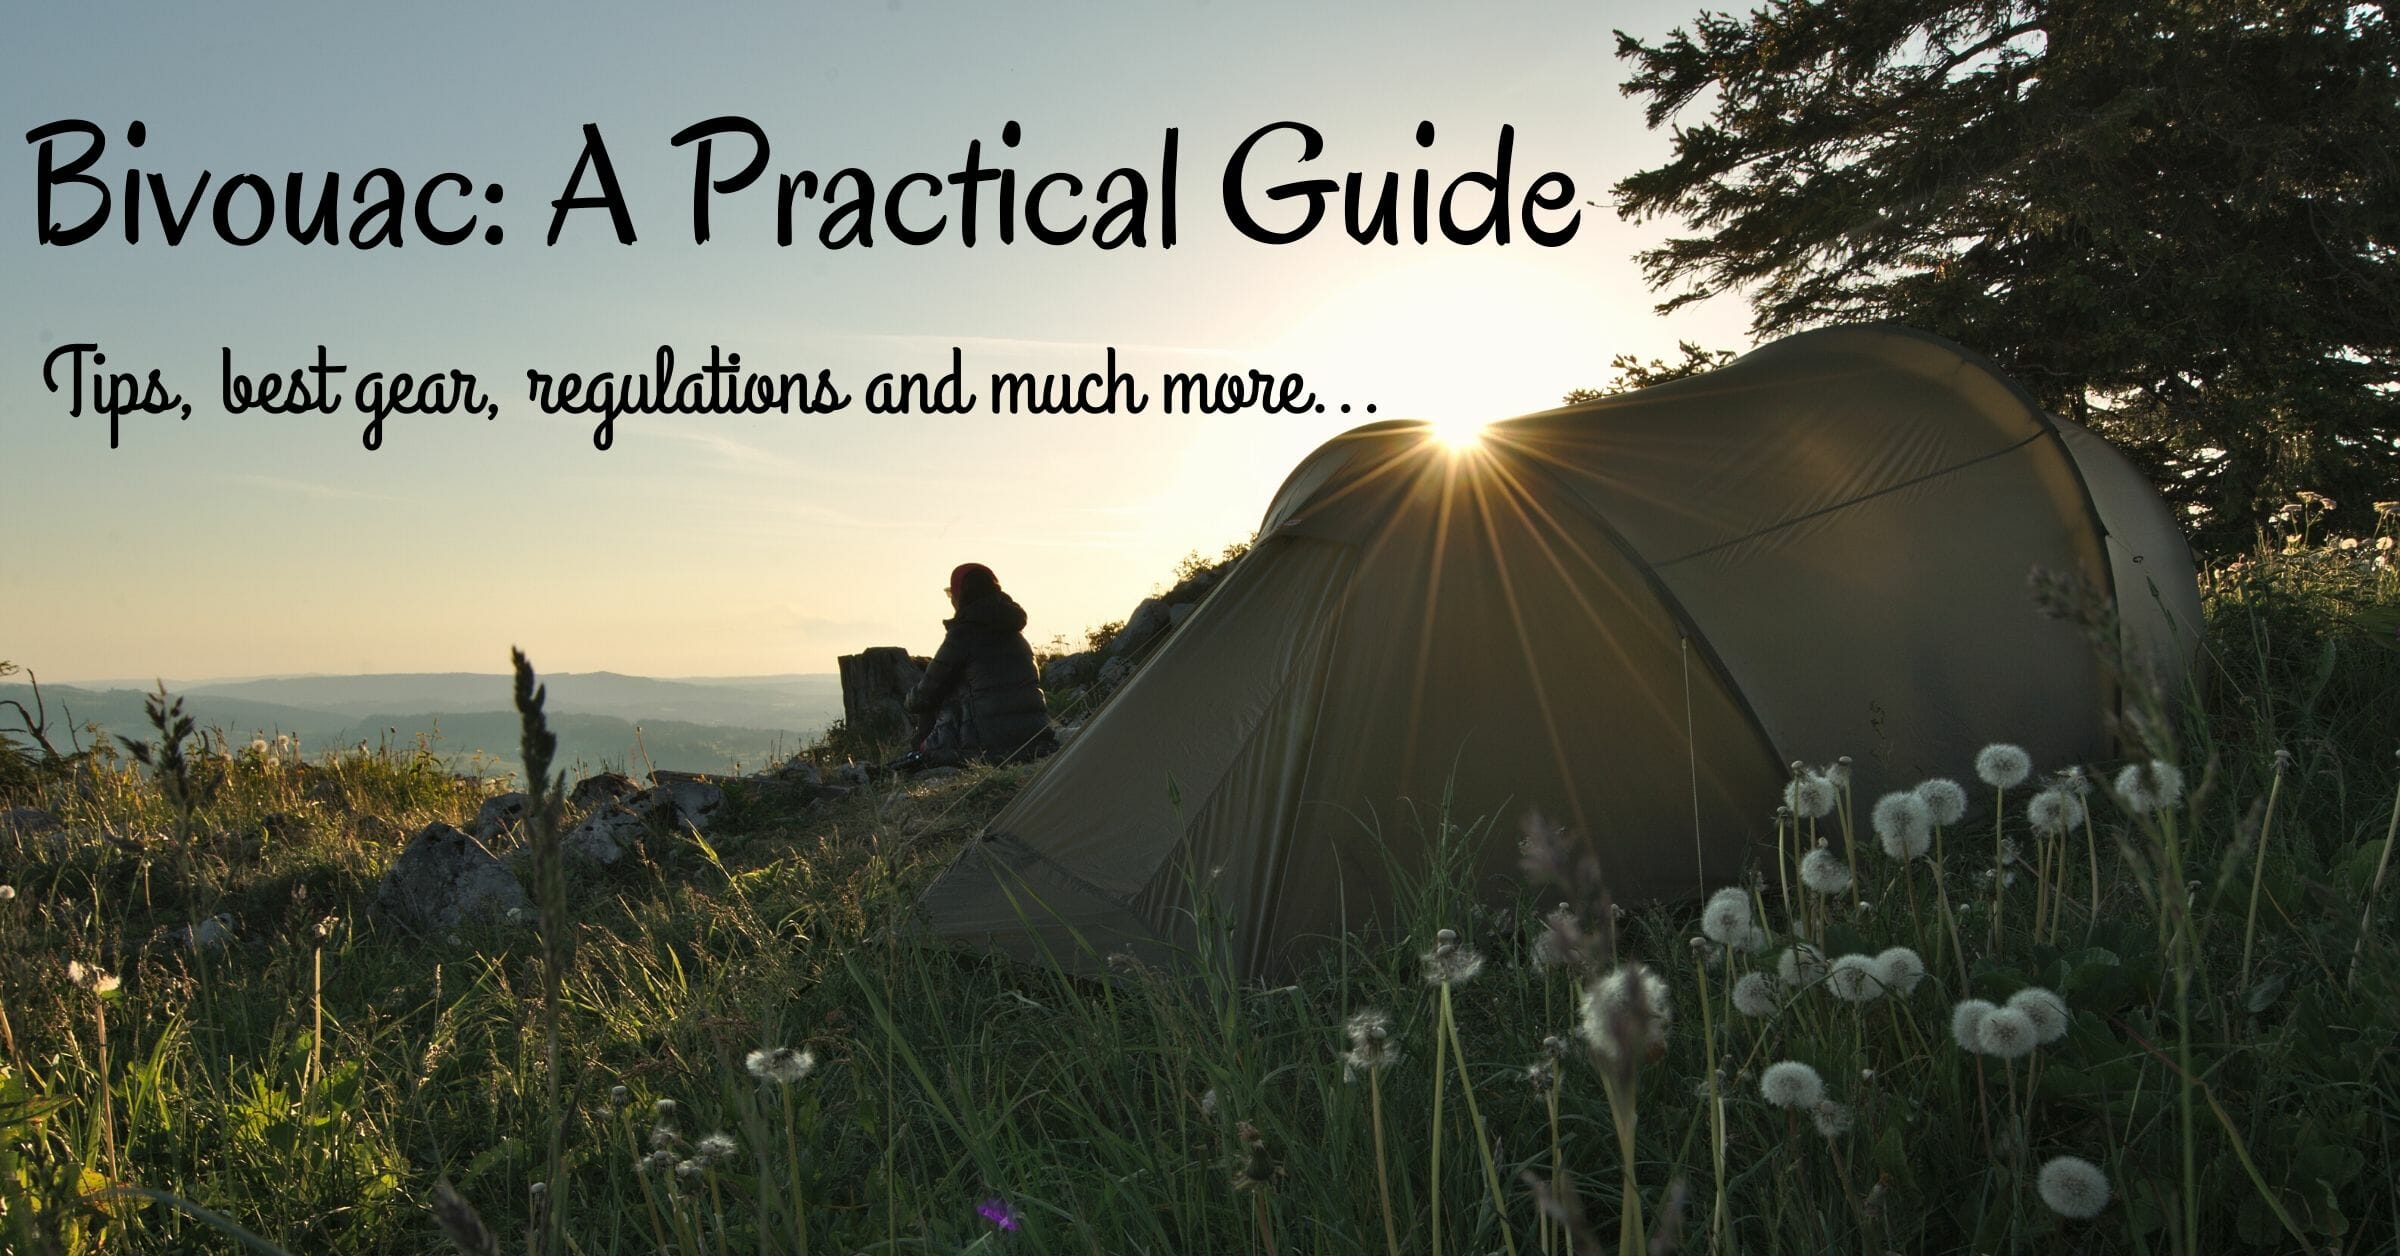 Complete guide to Bivouac / wild camping: Definition, essential gear, tips